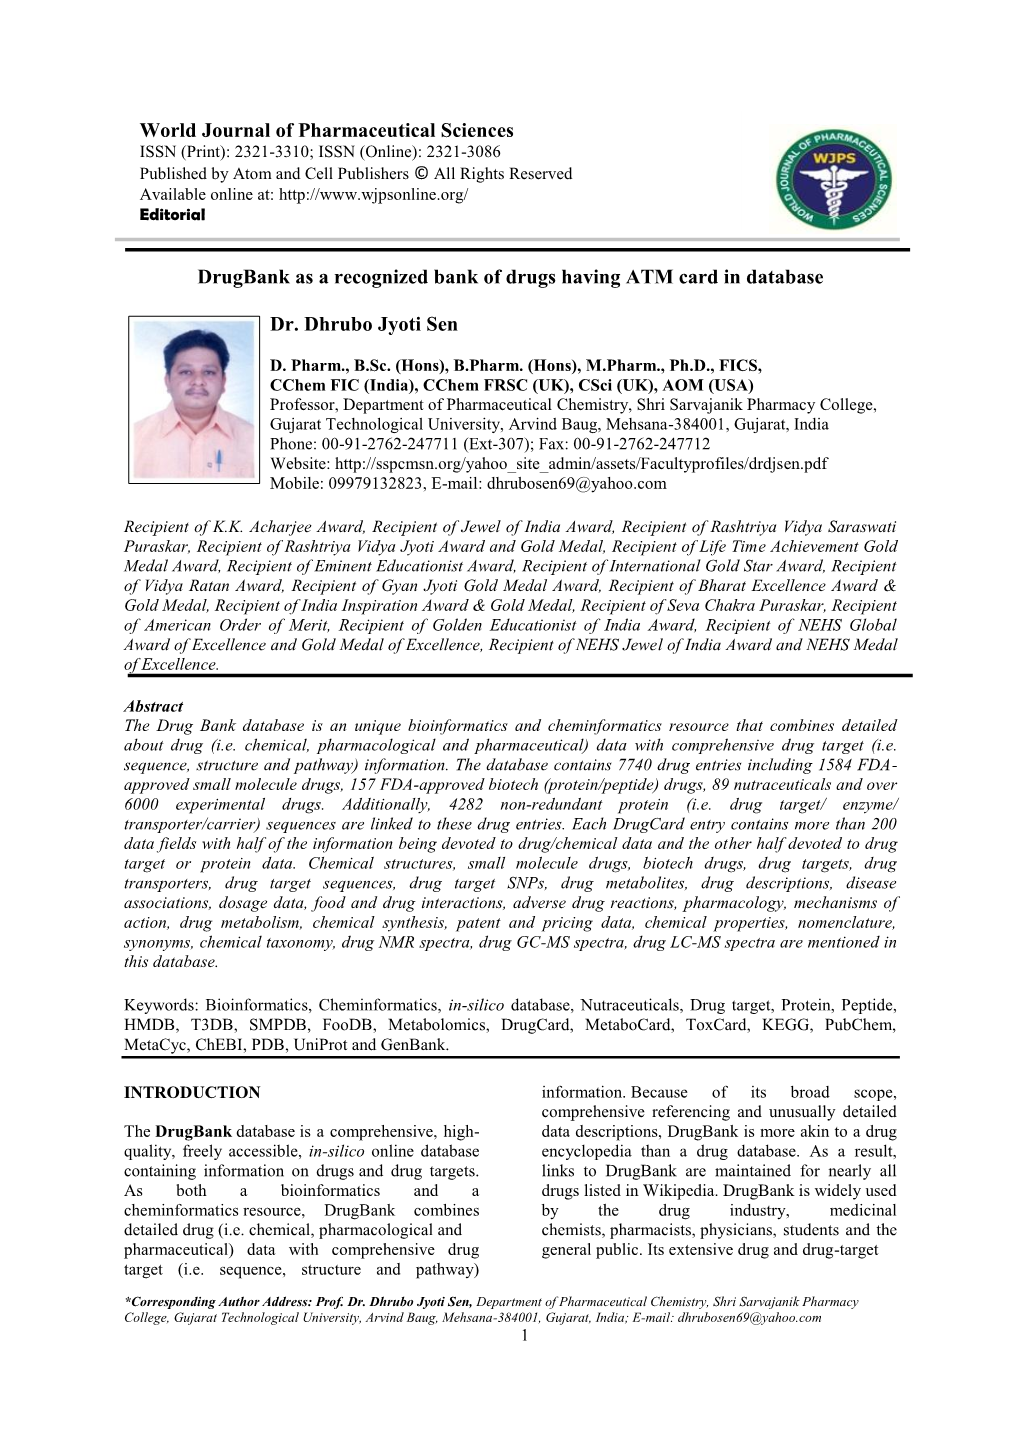 World Journal of Pharmaceutical Sciences Drugbank As A